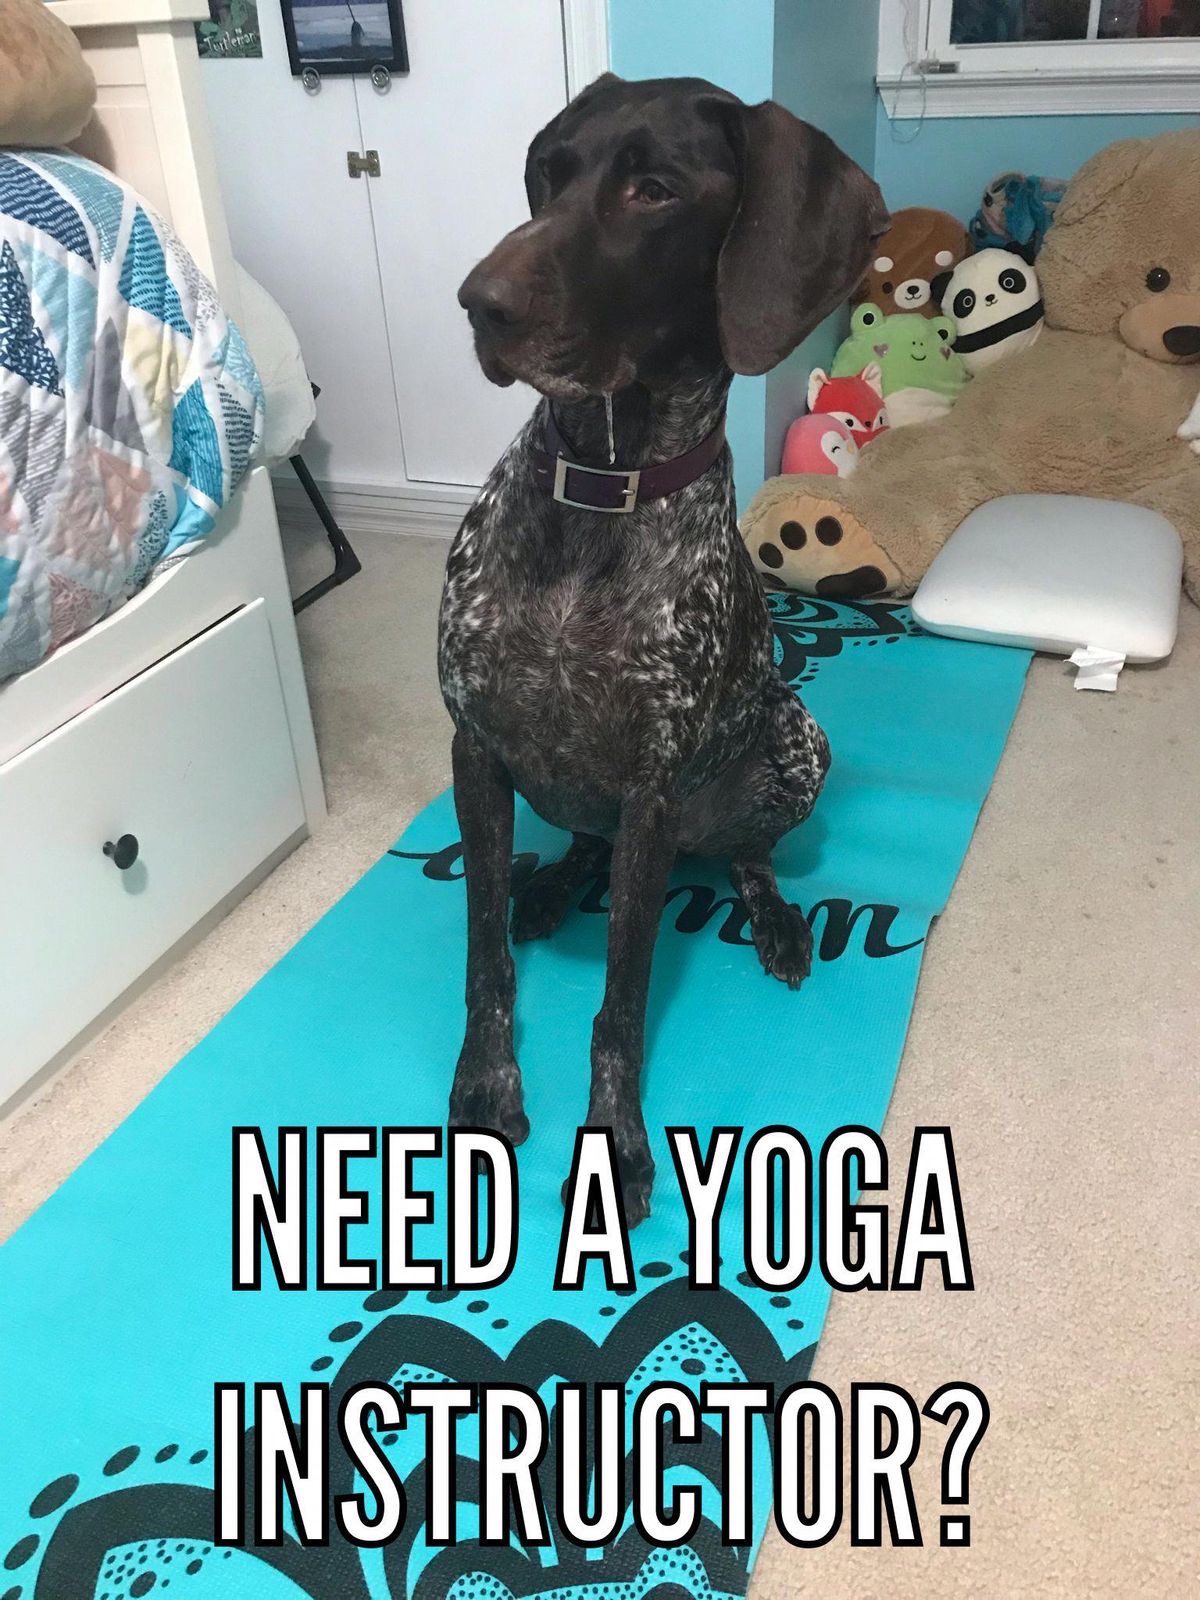 The 15 Funniest German Shorthaired Pointer Memes | Page 2 of 3 | PetPress